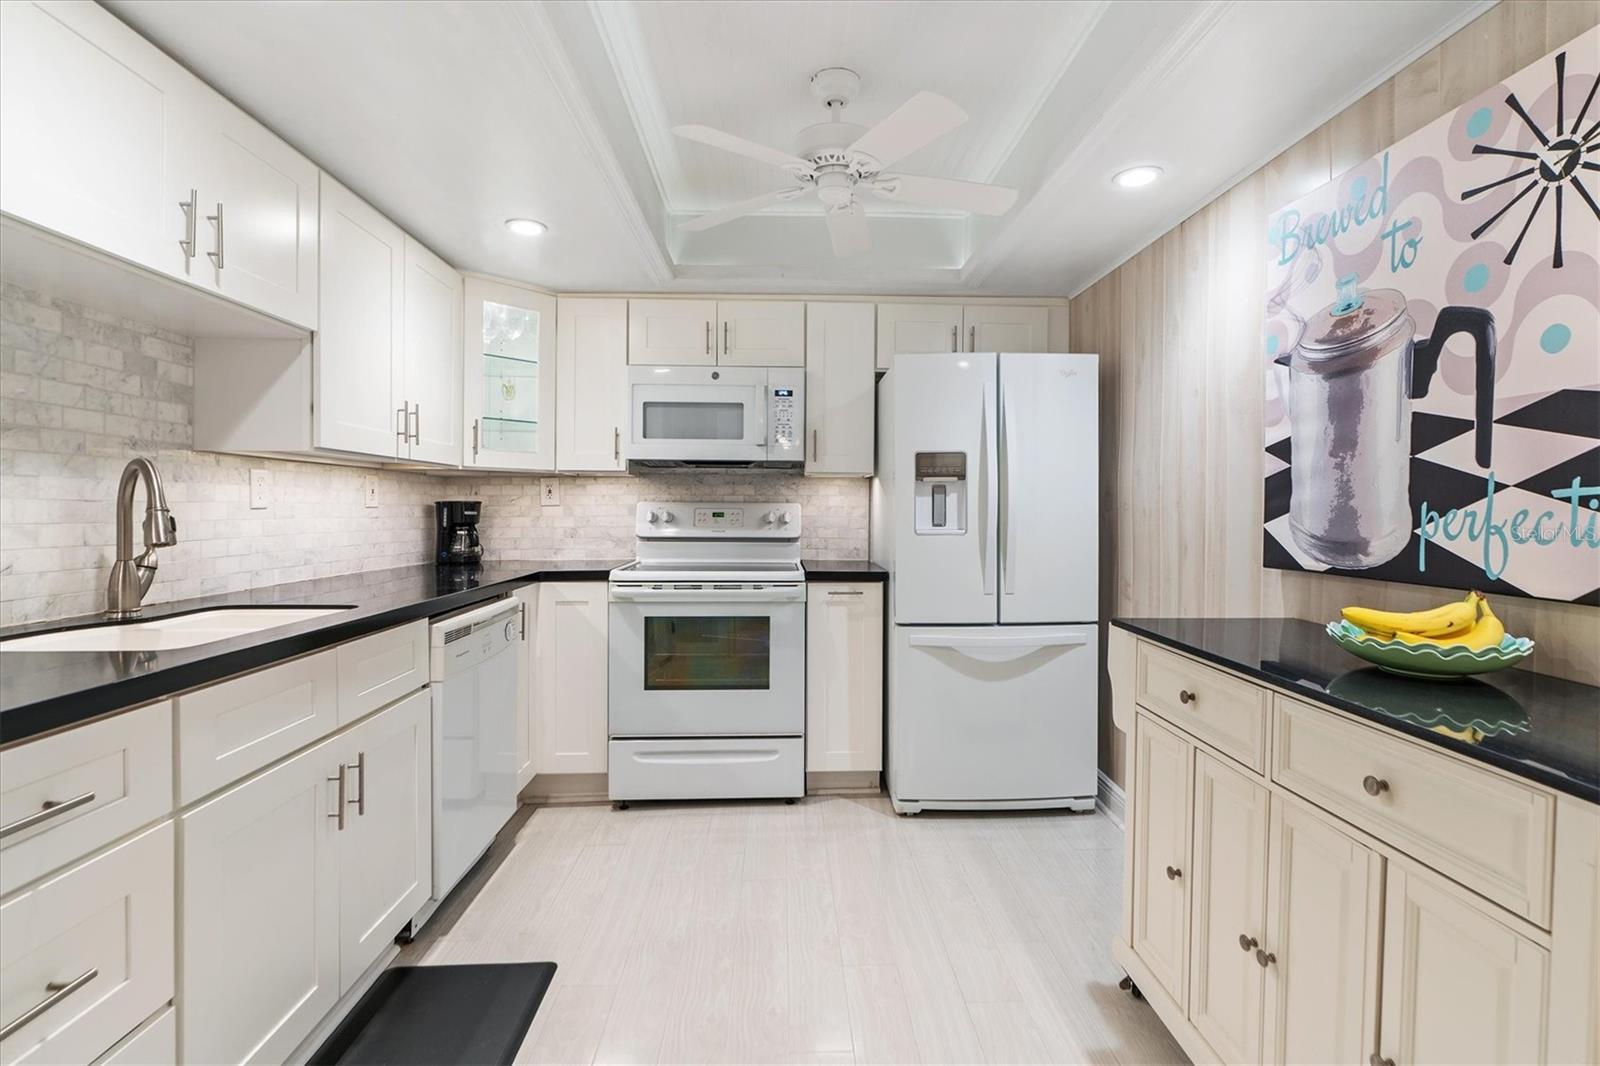 Large Kitchen with luxury vinyl tile, stone countertops, white appliances, rolling pantry cart, and ceiling fan